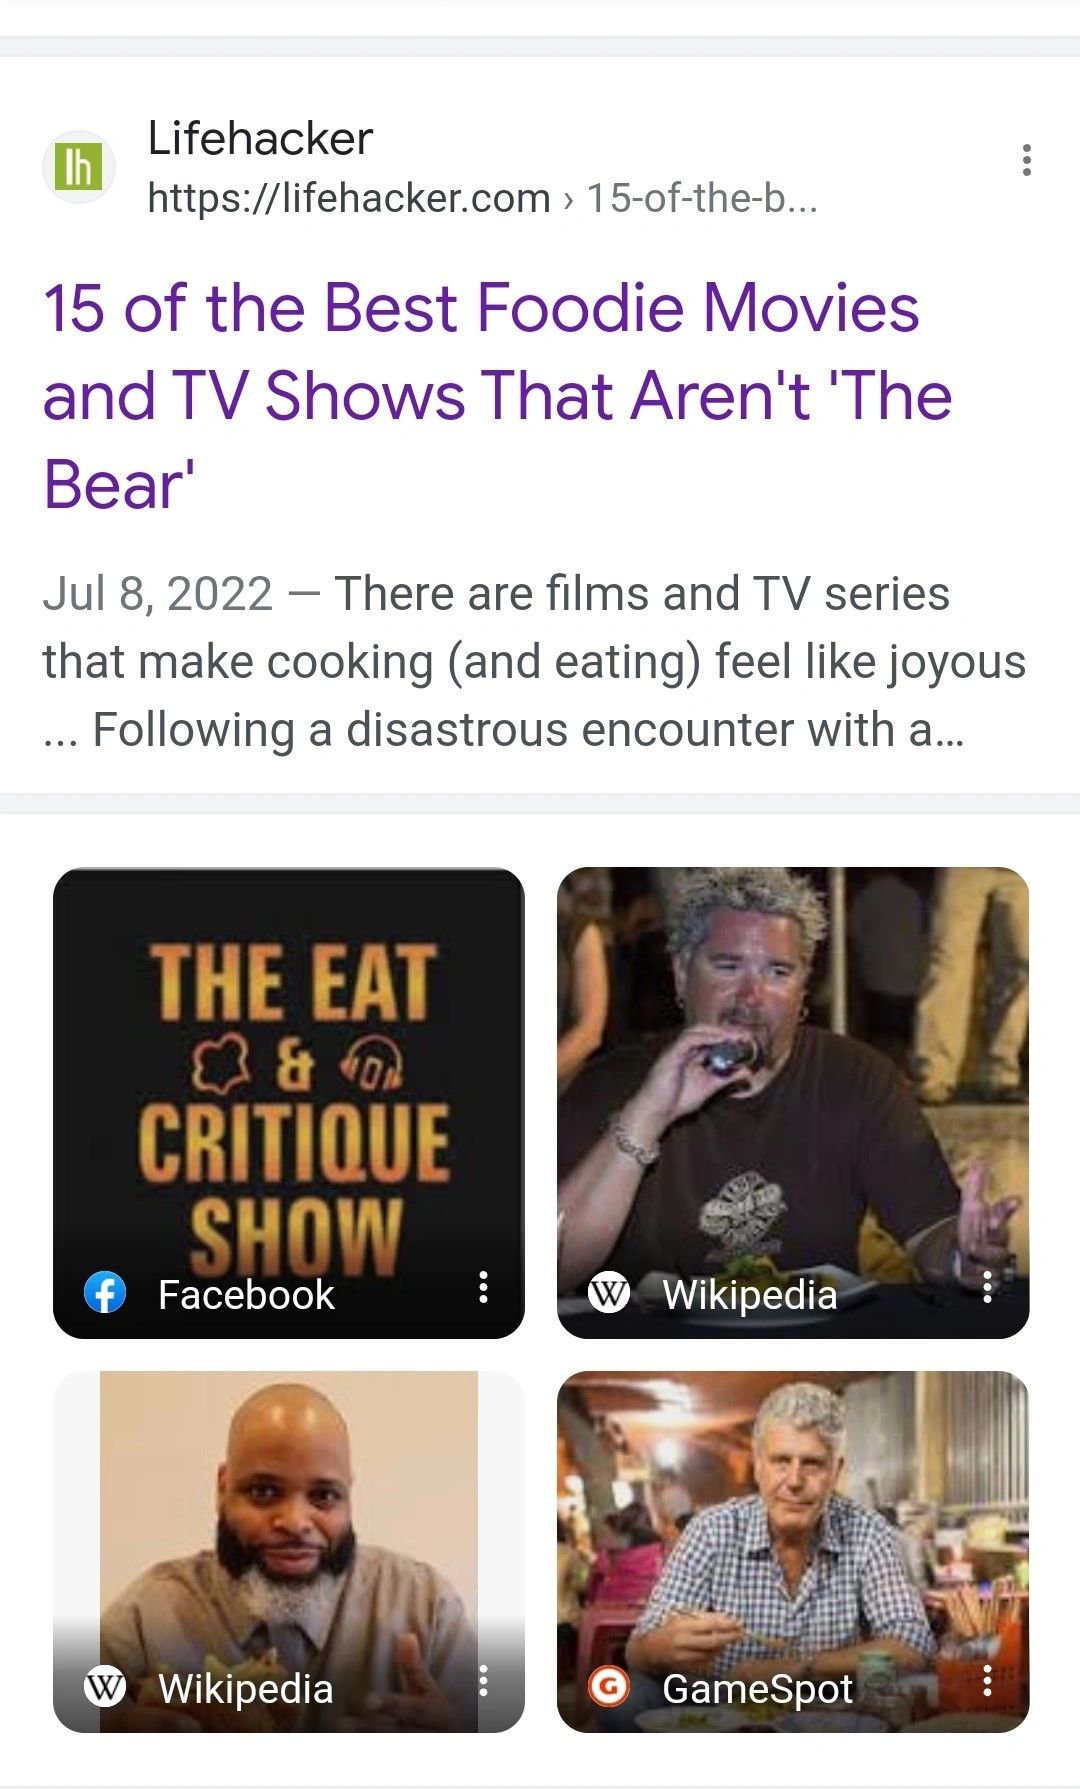 The Eat and Critique was voted as one of the best foodie movies and TV shows that aren't The Bear.